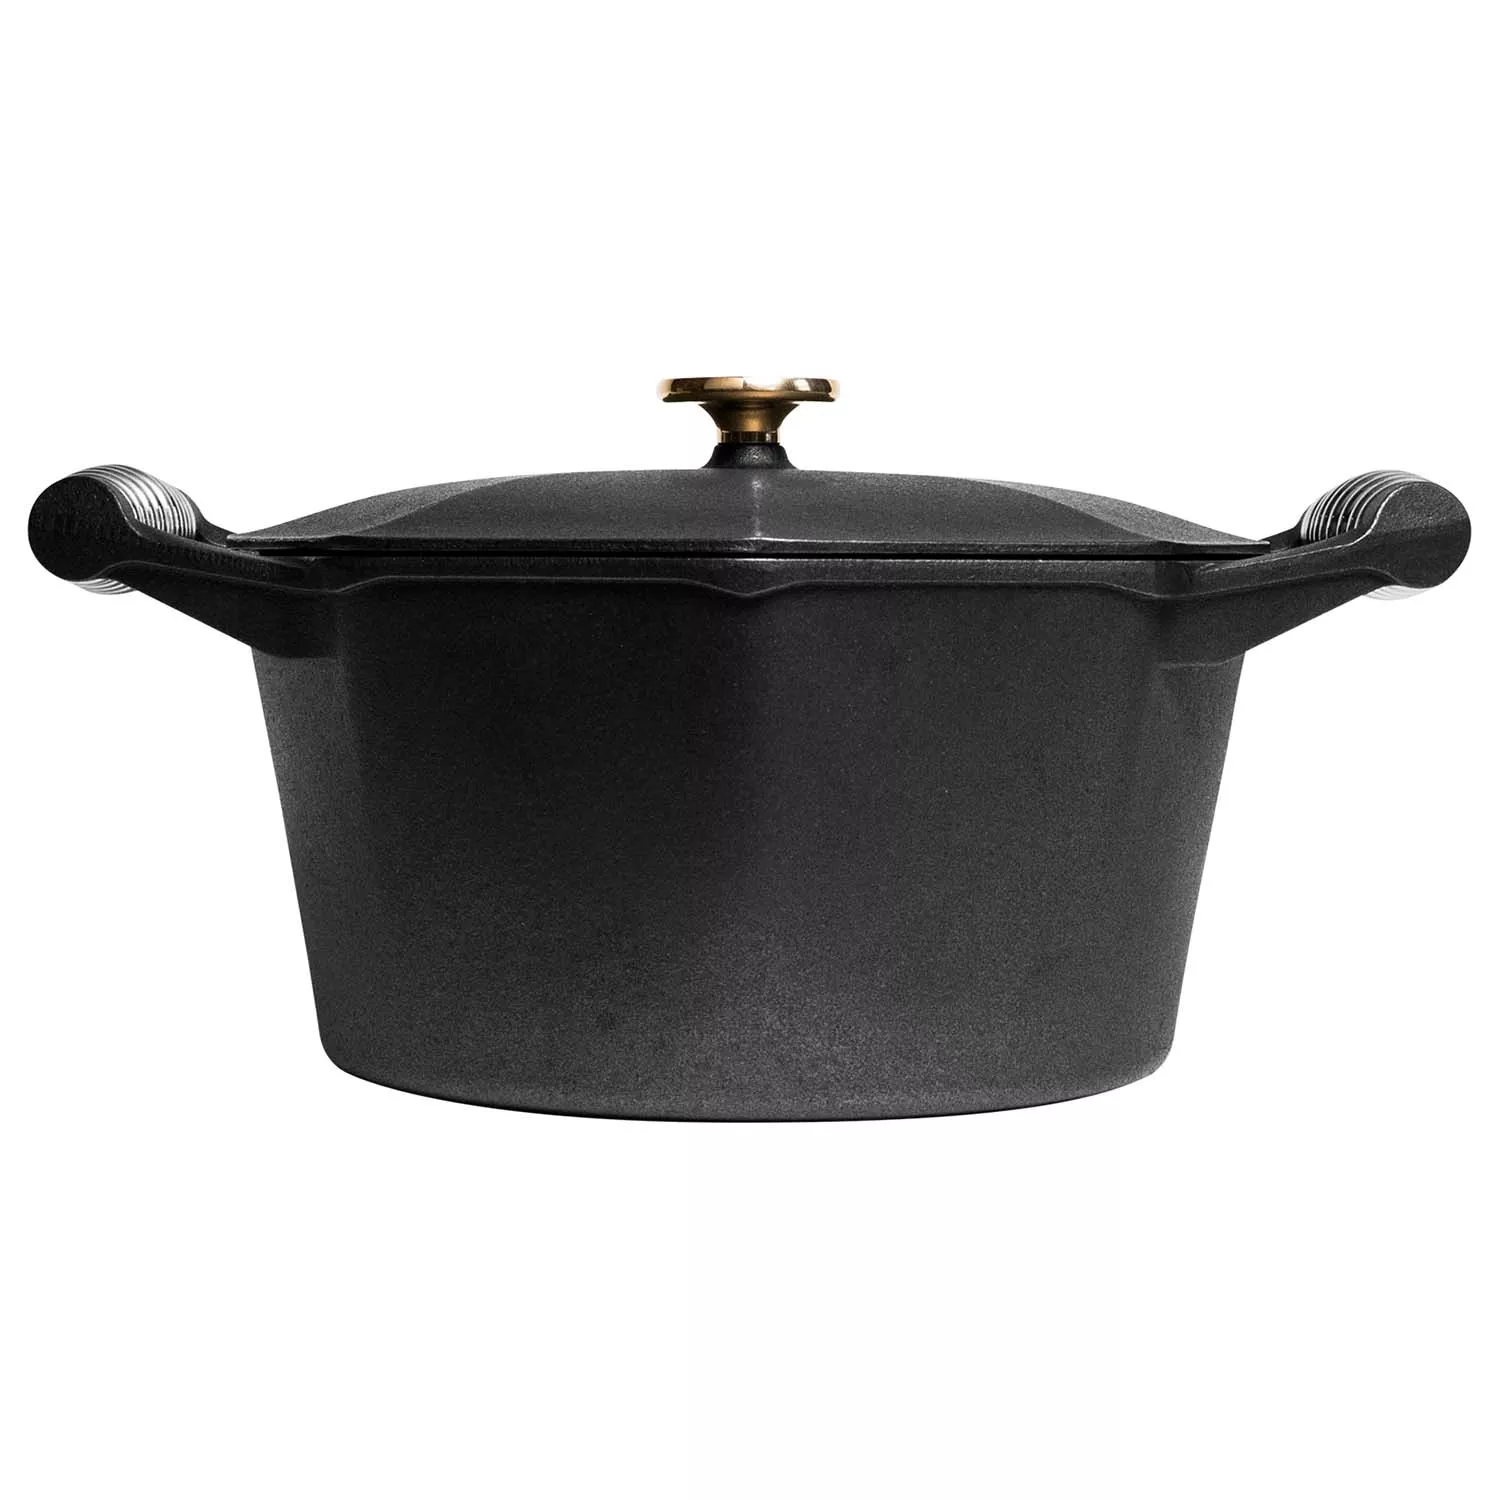 Finex Cast Iron Skillet with Lid + Reviews